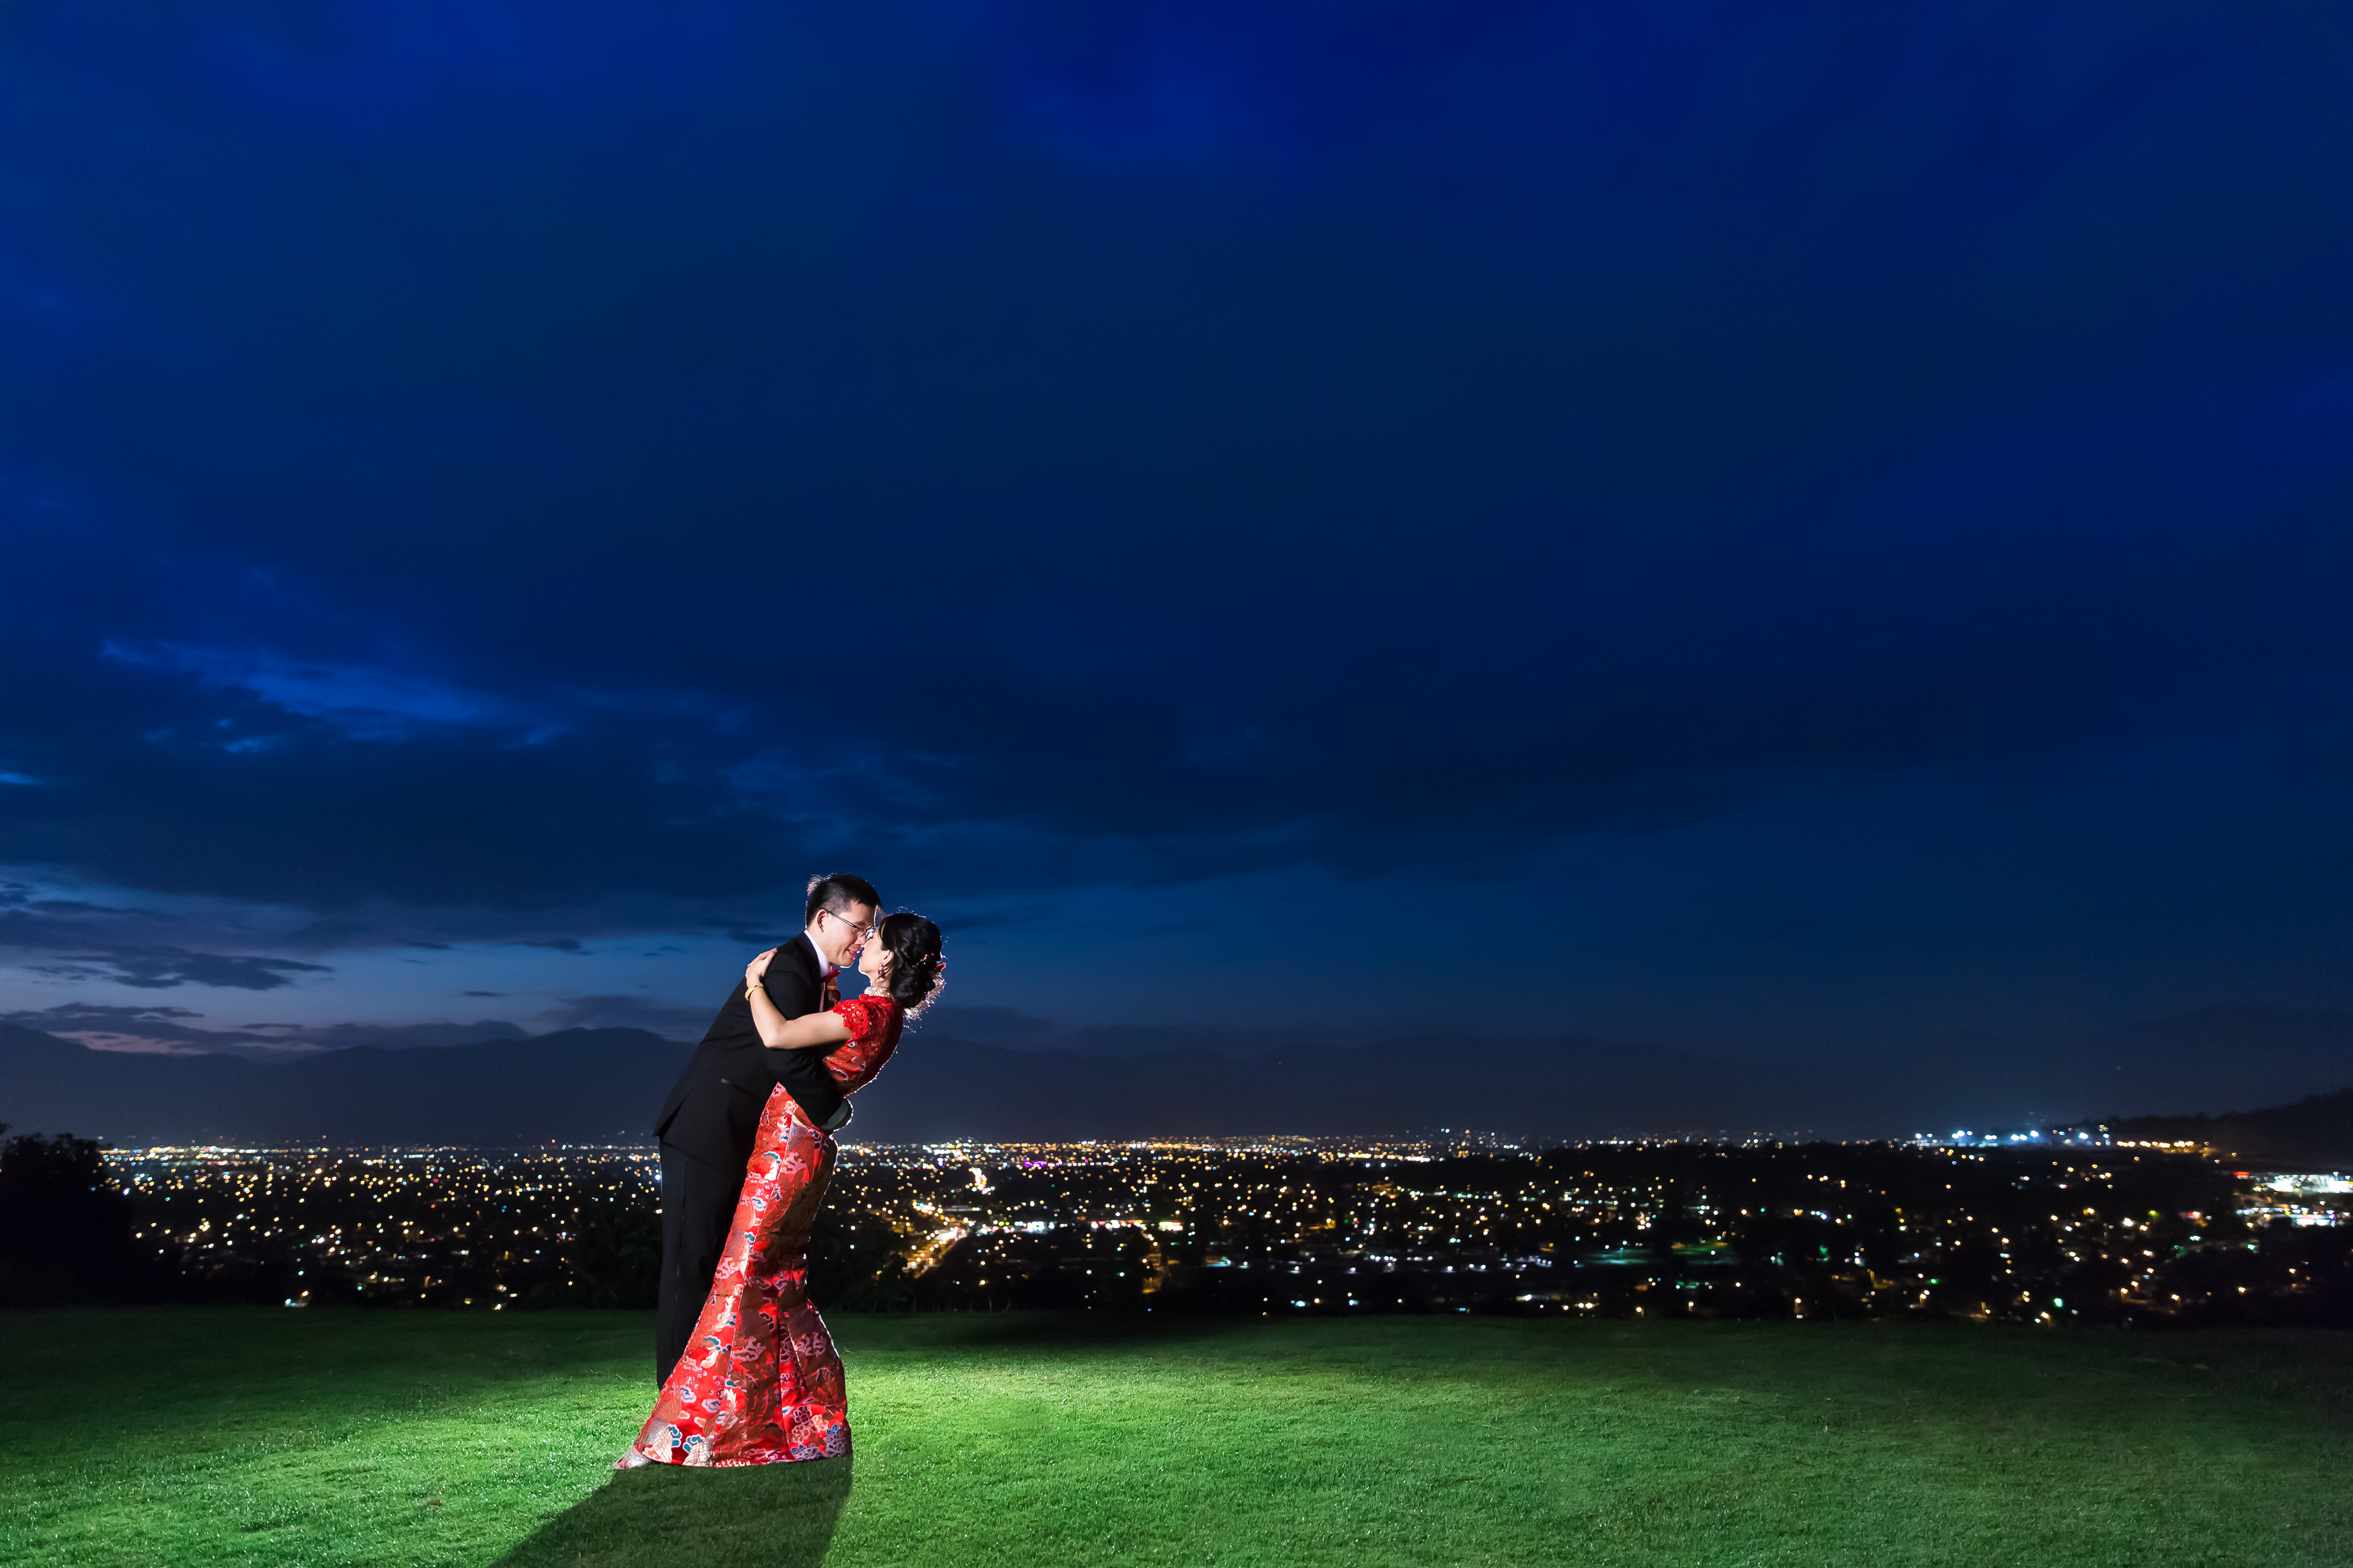 Groom dipping bride for kiss overlooking nighttime cityscape 